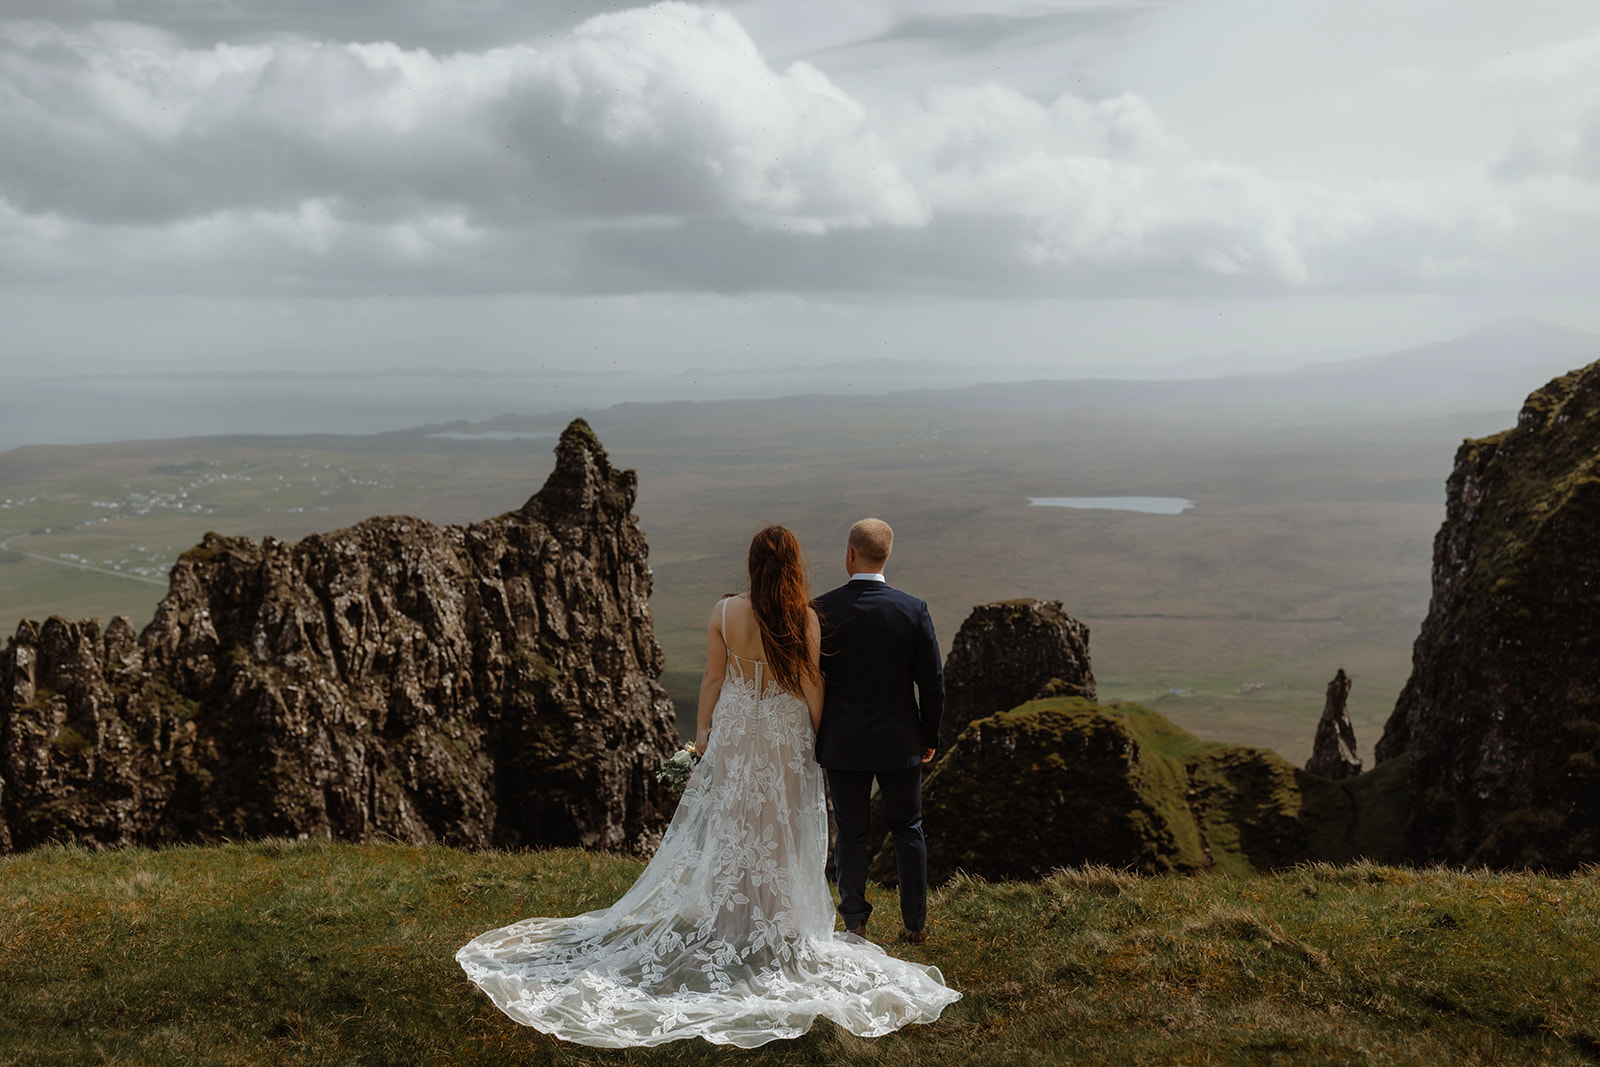 Emma and Matthew stand hand in hand as they admire the picturesque beauty of the Isle of Skye during their elopement day